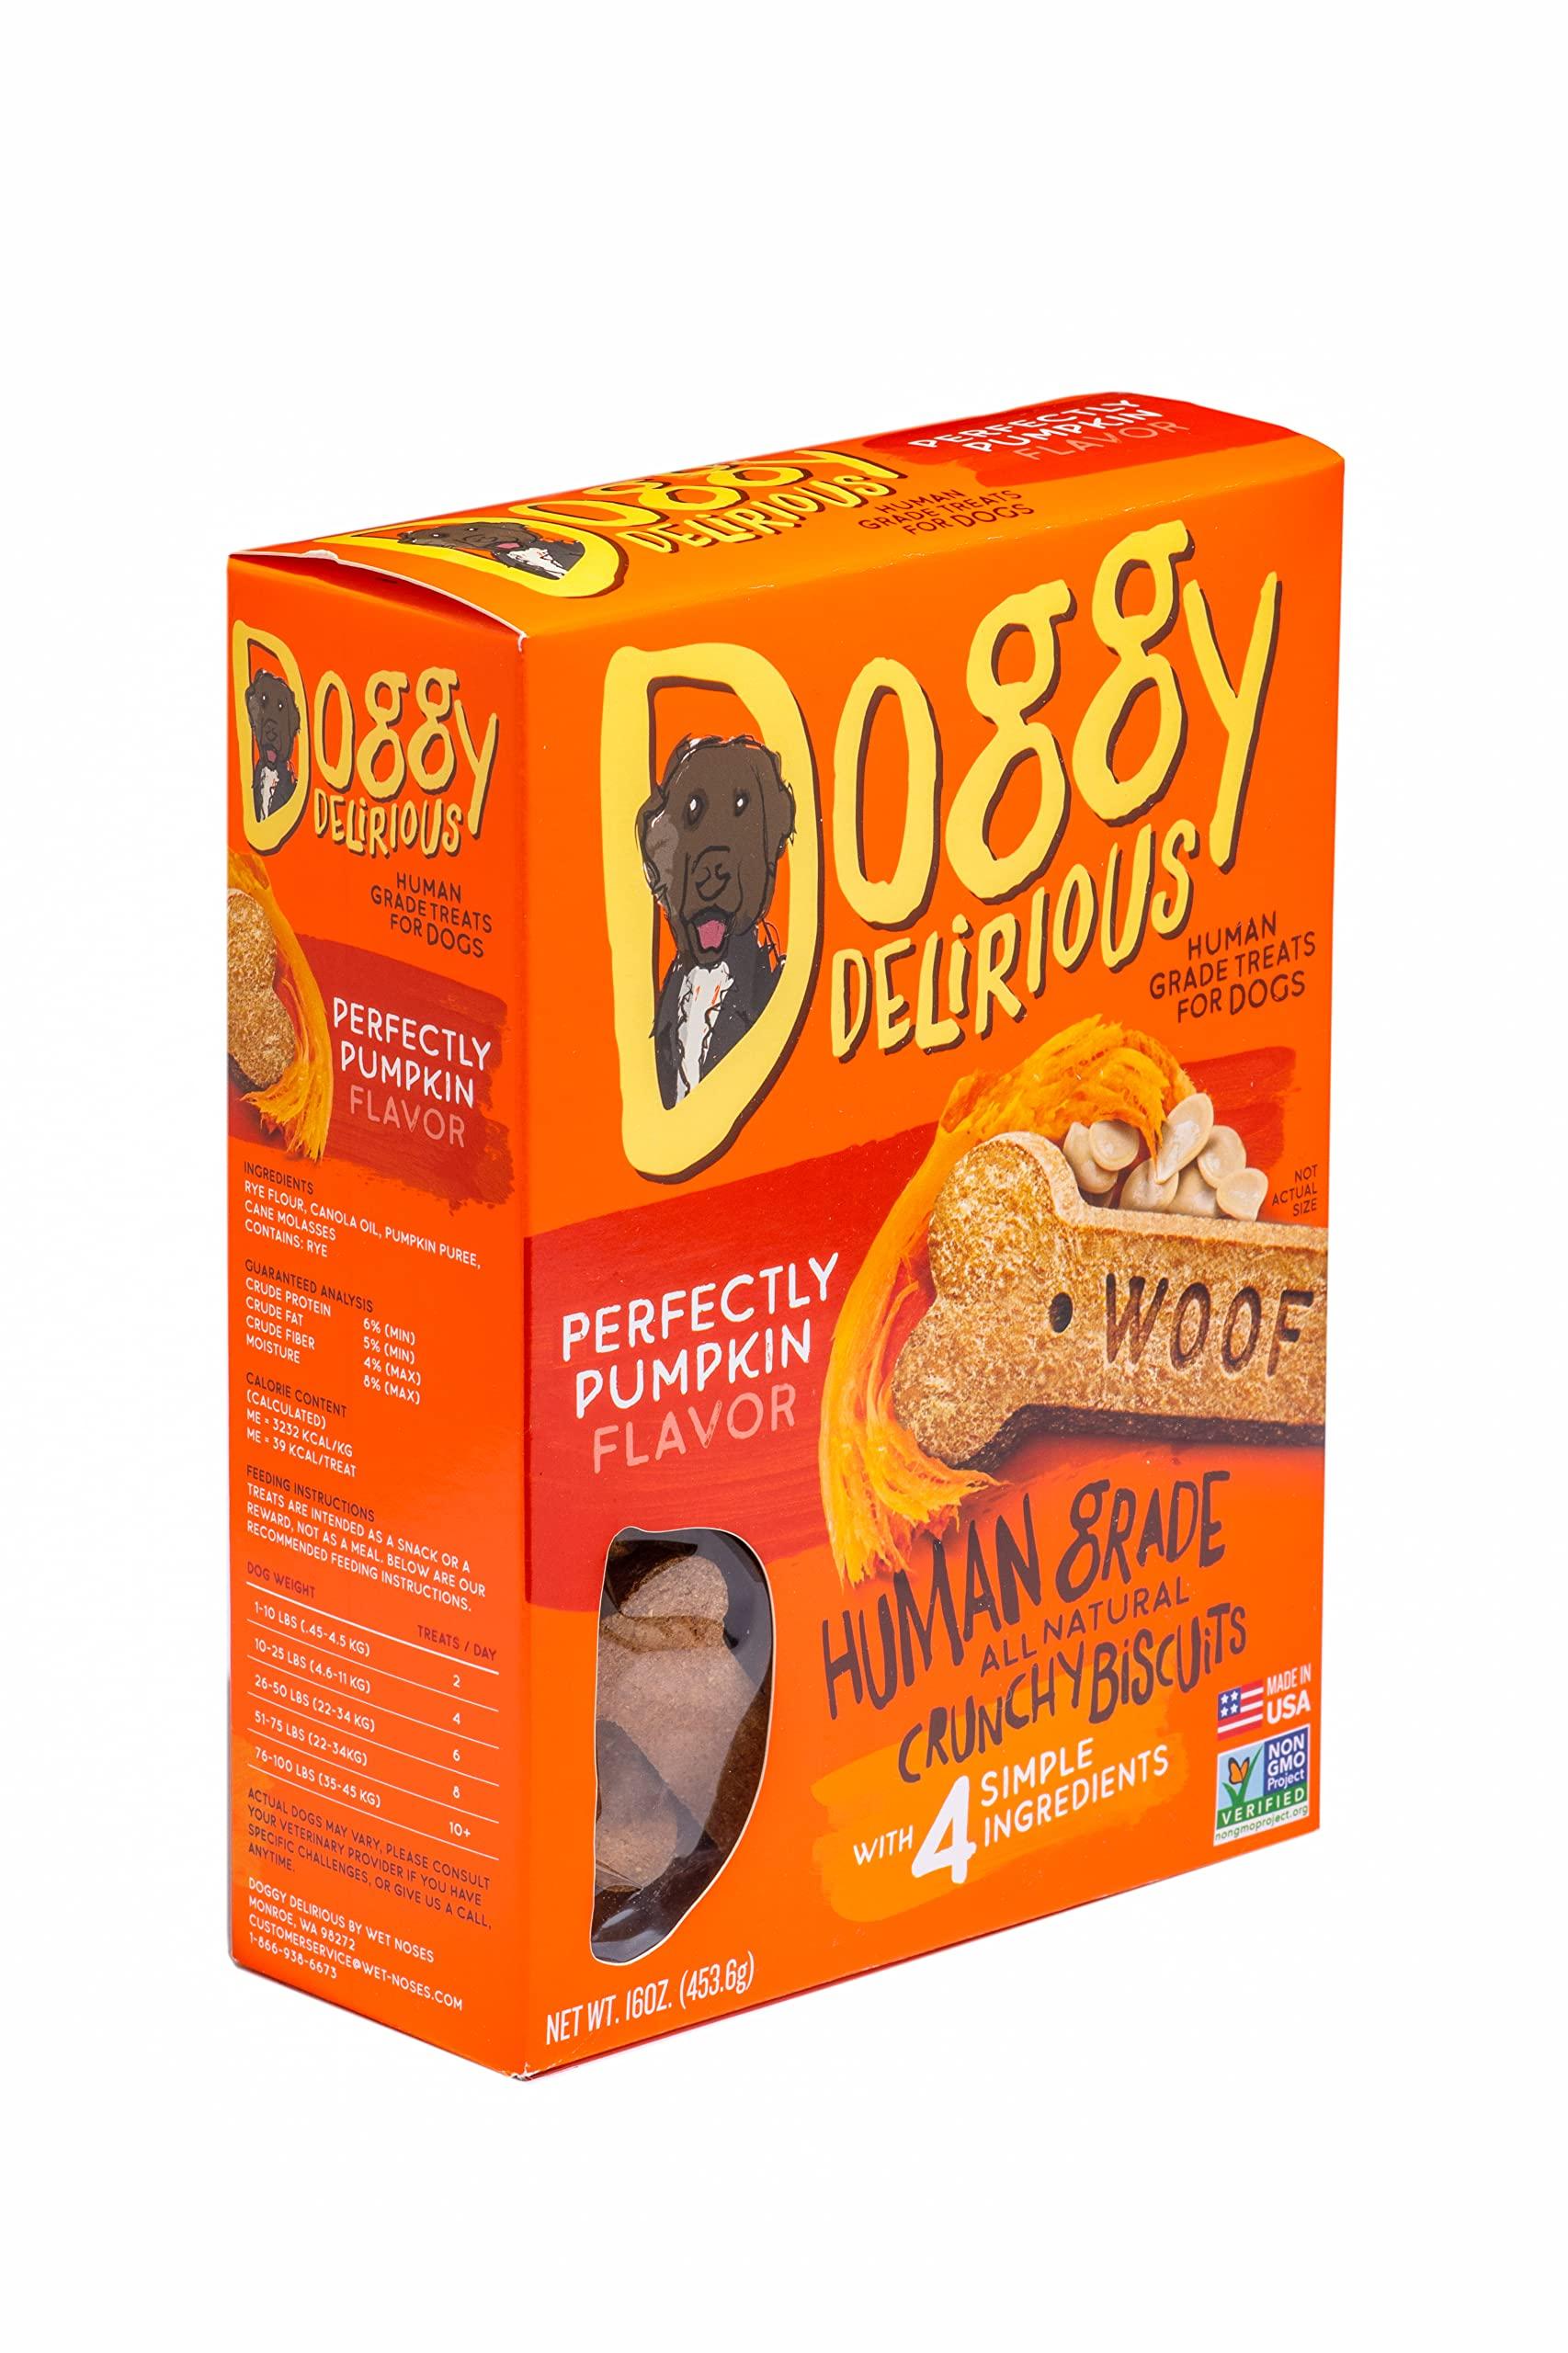 Doggy Delirious crunchy Dog Treats - for All Pet Sizes Breeds - All-Natural Puppy Treat - 100% Human-grade - Delicious Pet Treat Bones Snacks for Dogs - Pumpkin 16 Oz.